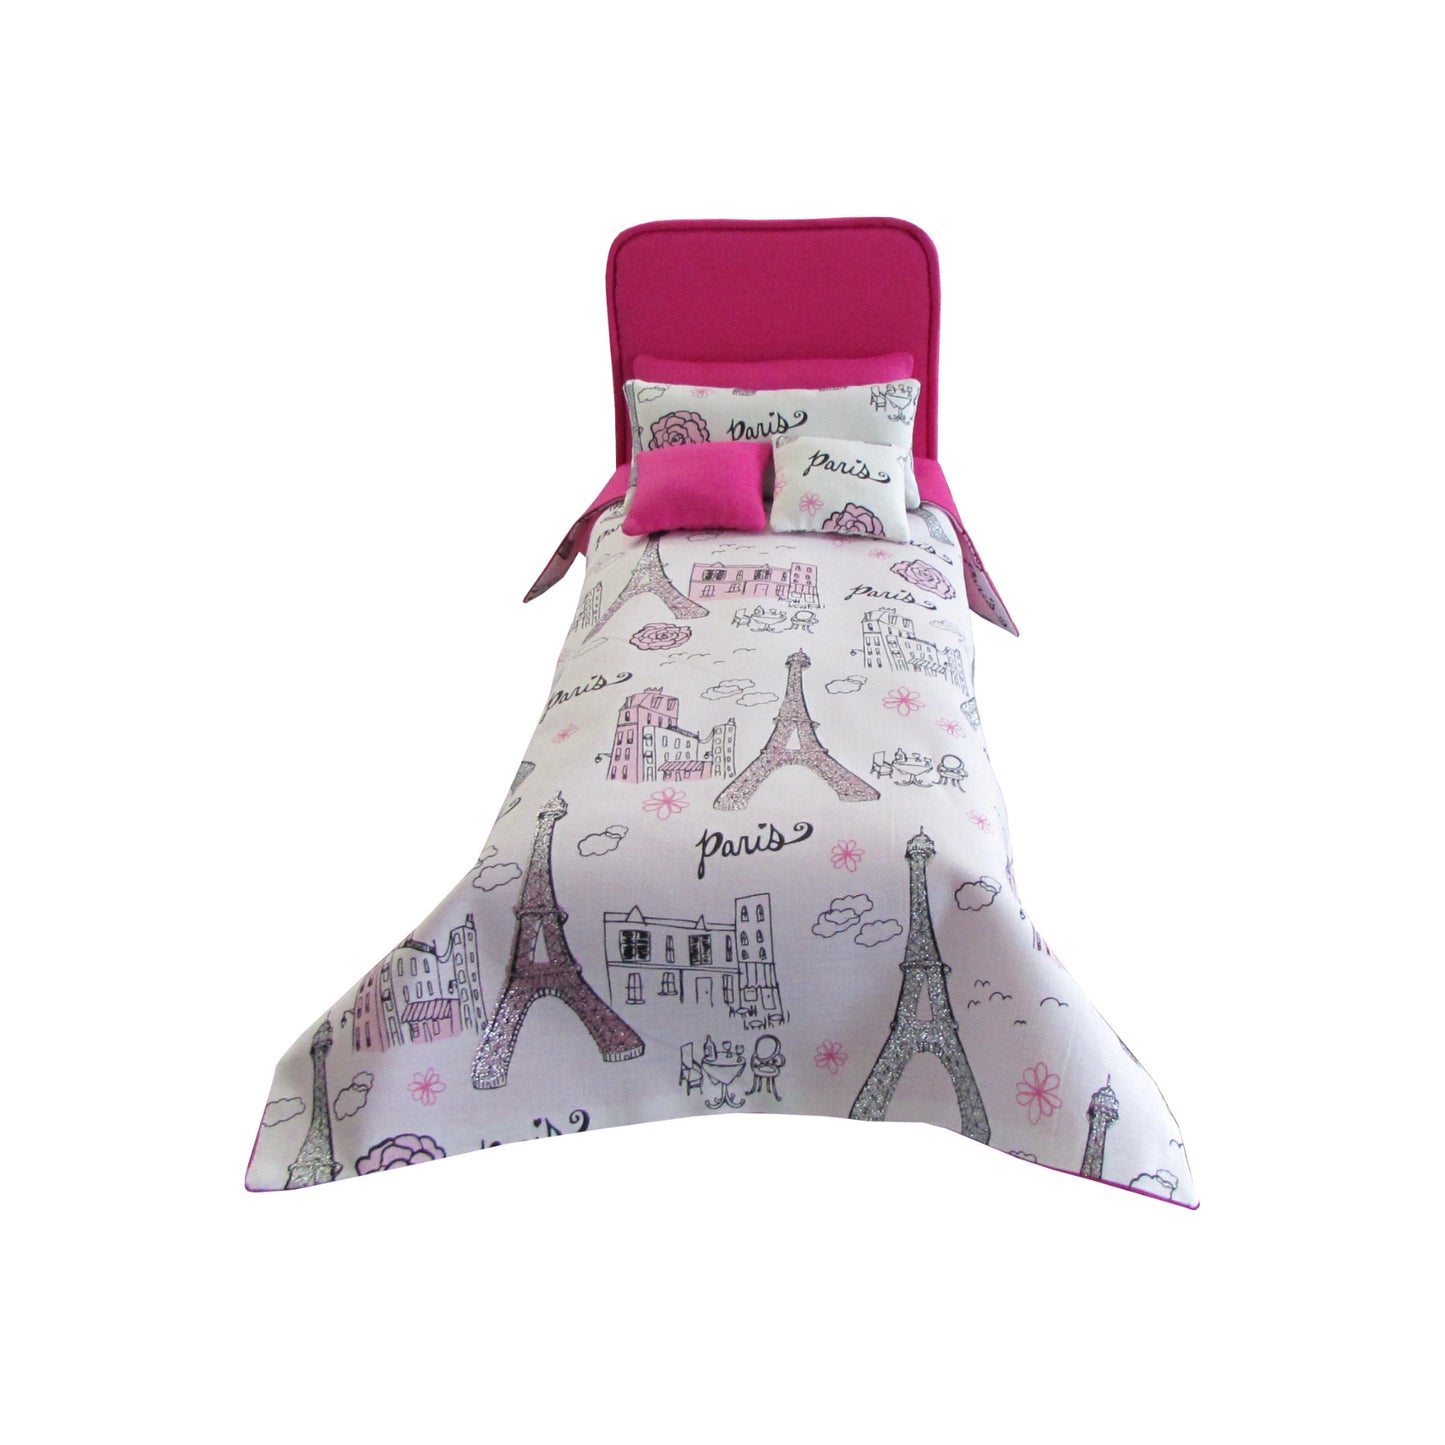 Bright Pink Doll Bed and Paris Doll Bedding for 11.5-inch and 12-inch dolls Second view